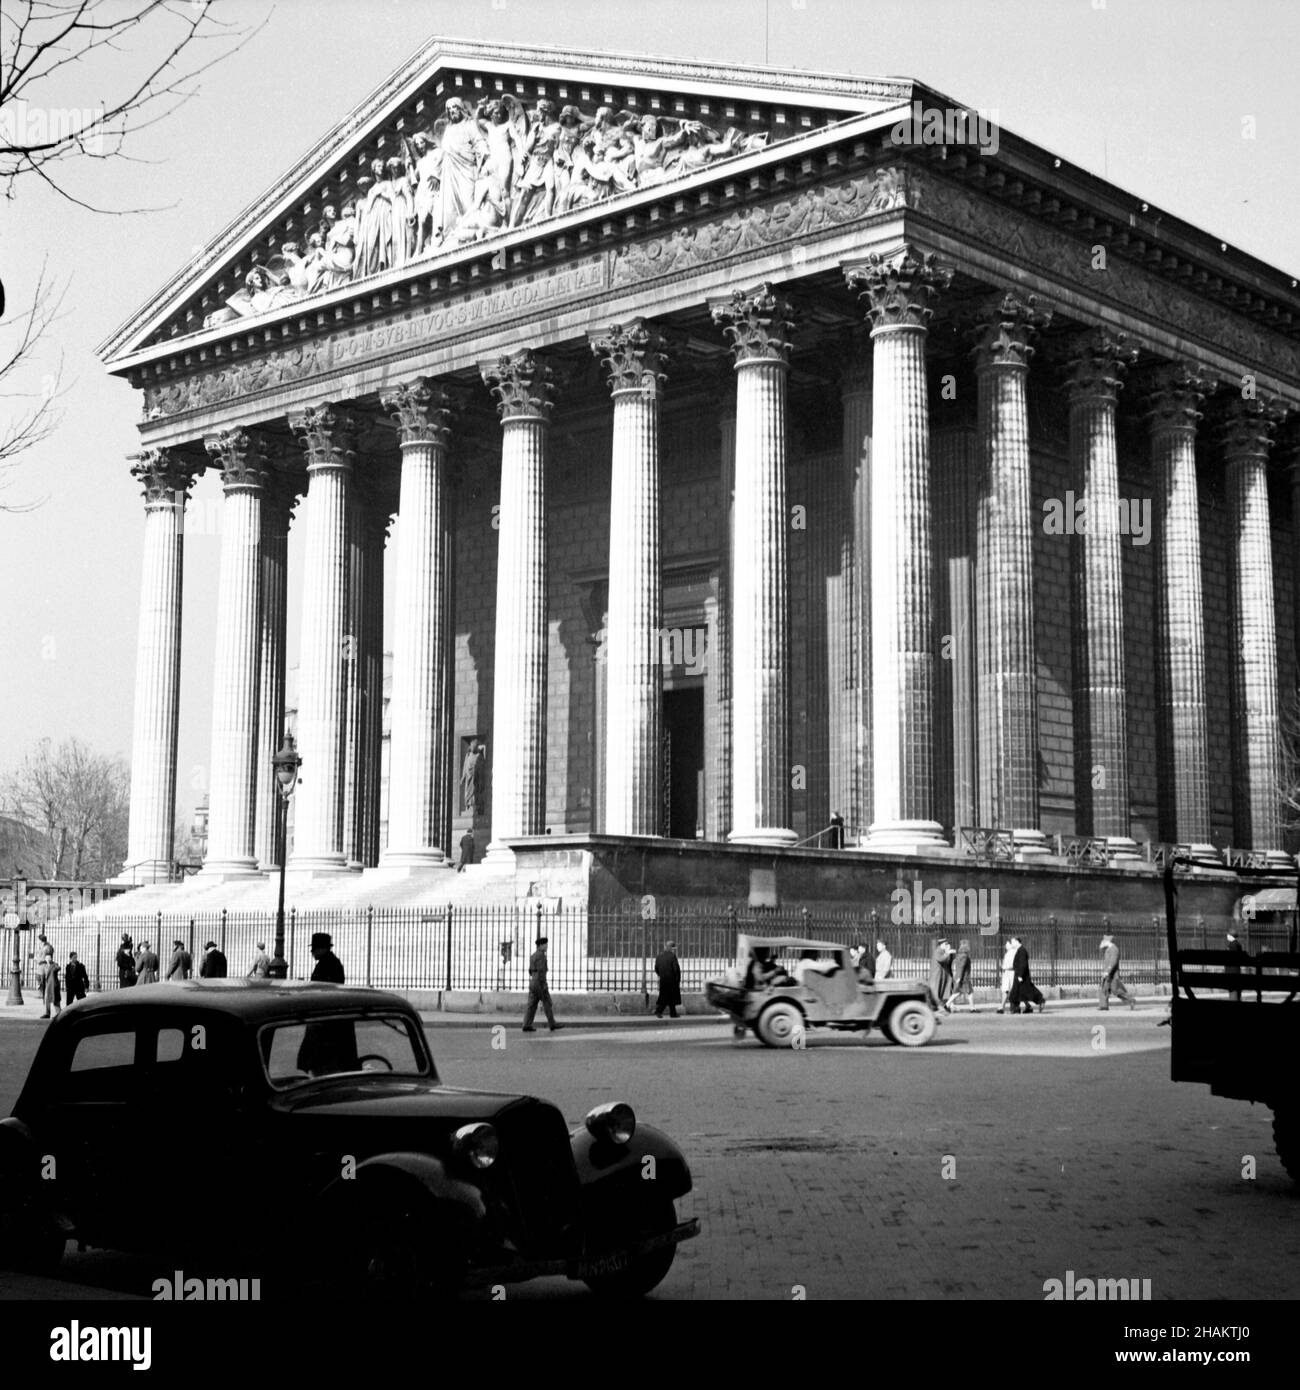 Paris La Madeleine near the end of WWII, 1945. A view of the Neo-classical church which opened in 1842. The camera position is across the road in the southeast corner and depicts the full columned southwest façade and some of the southeast façade. In the road are one military truck, one military jeep, and one parked passenger car. About two dozen pedestrians are in view Stock Photo